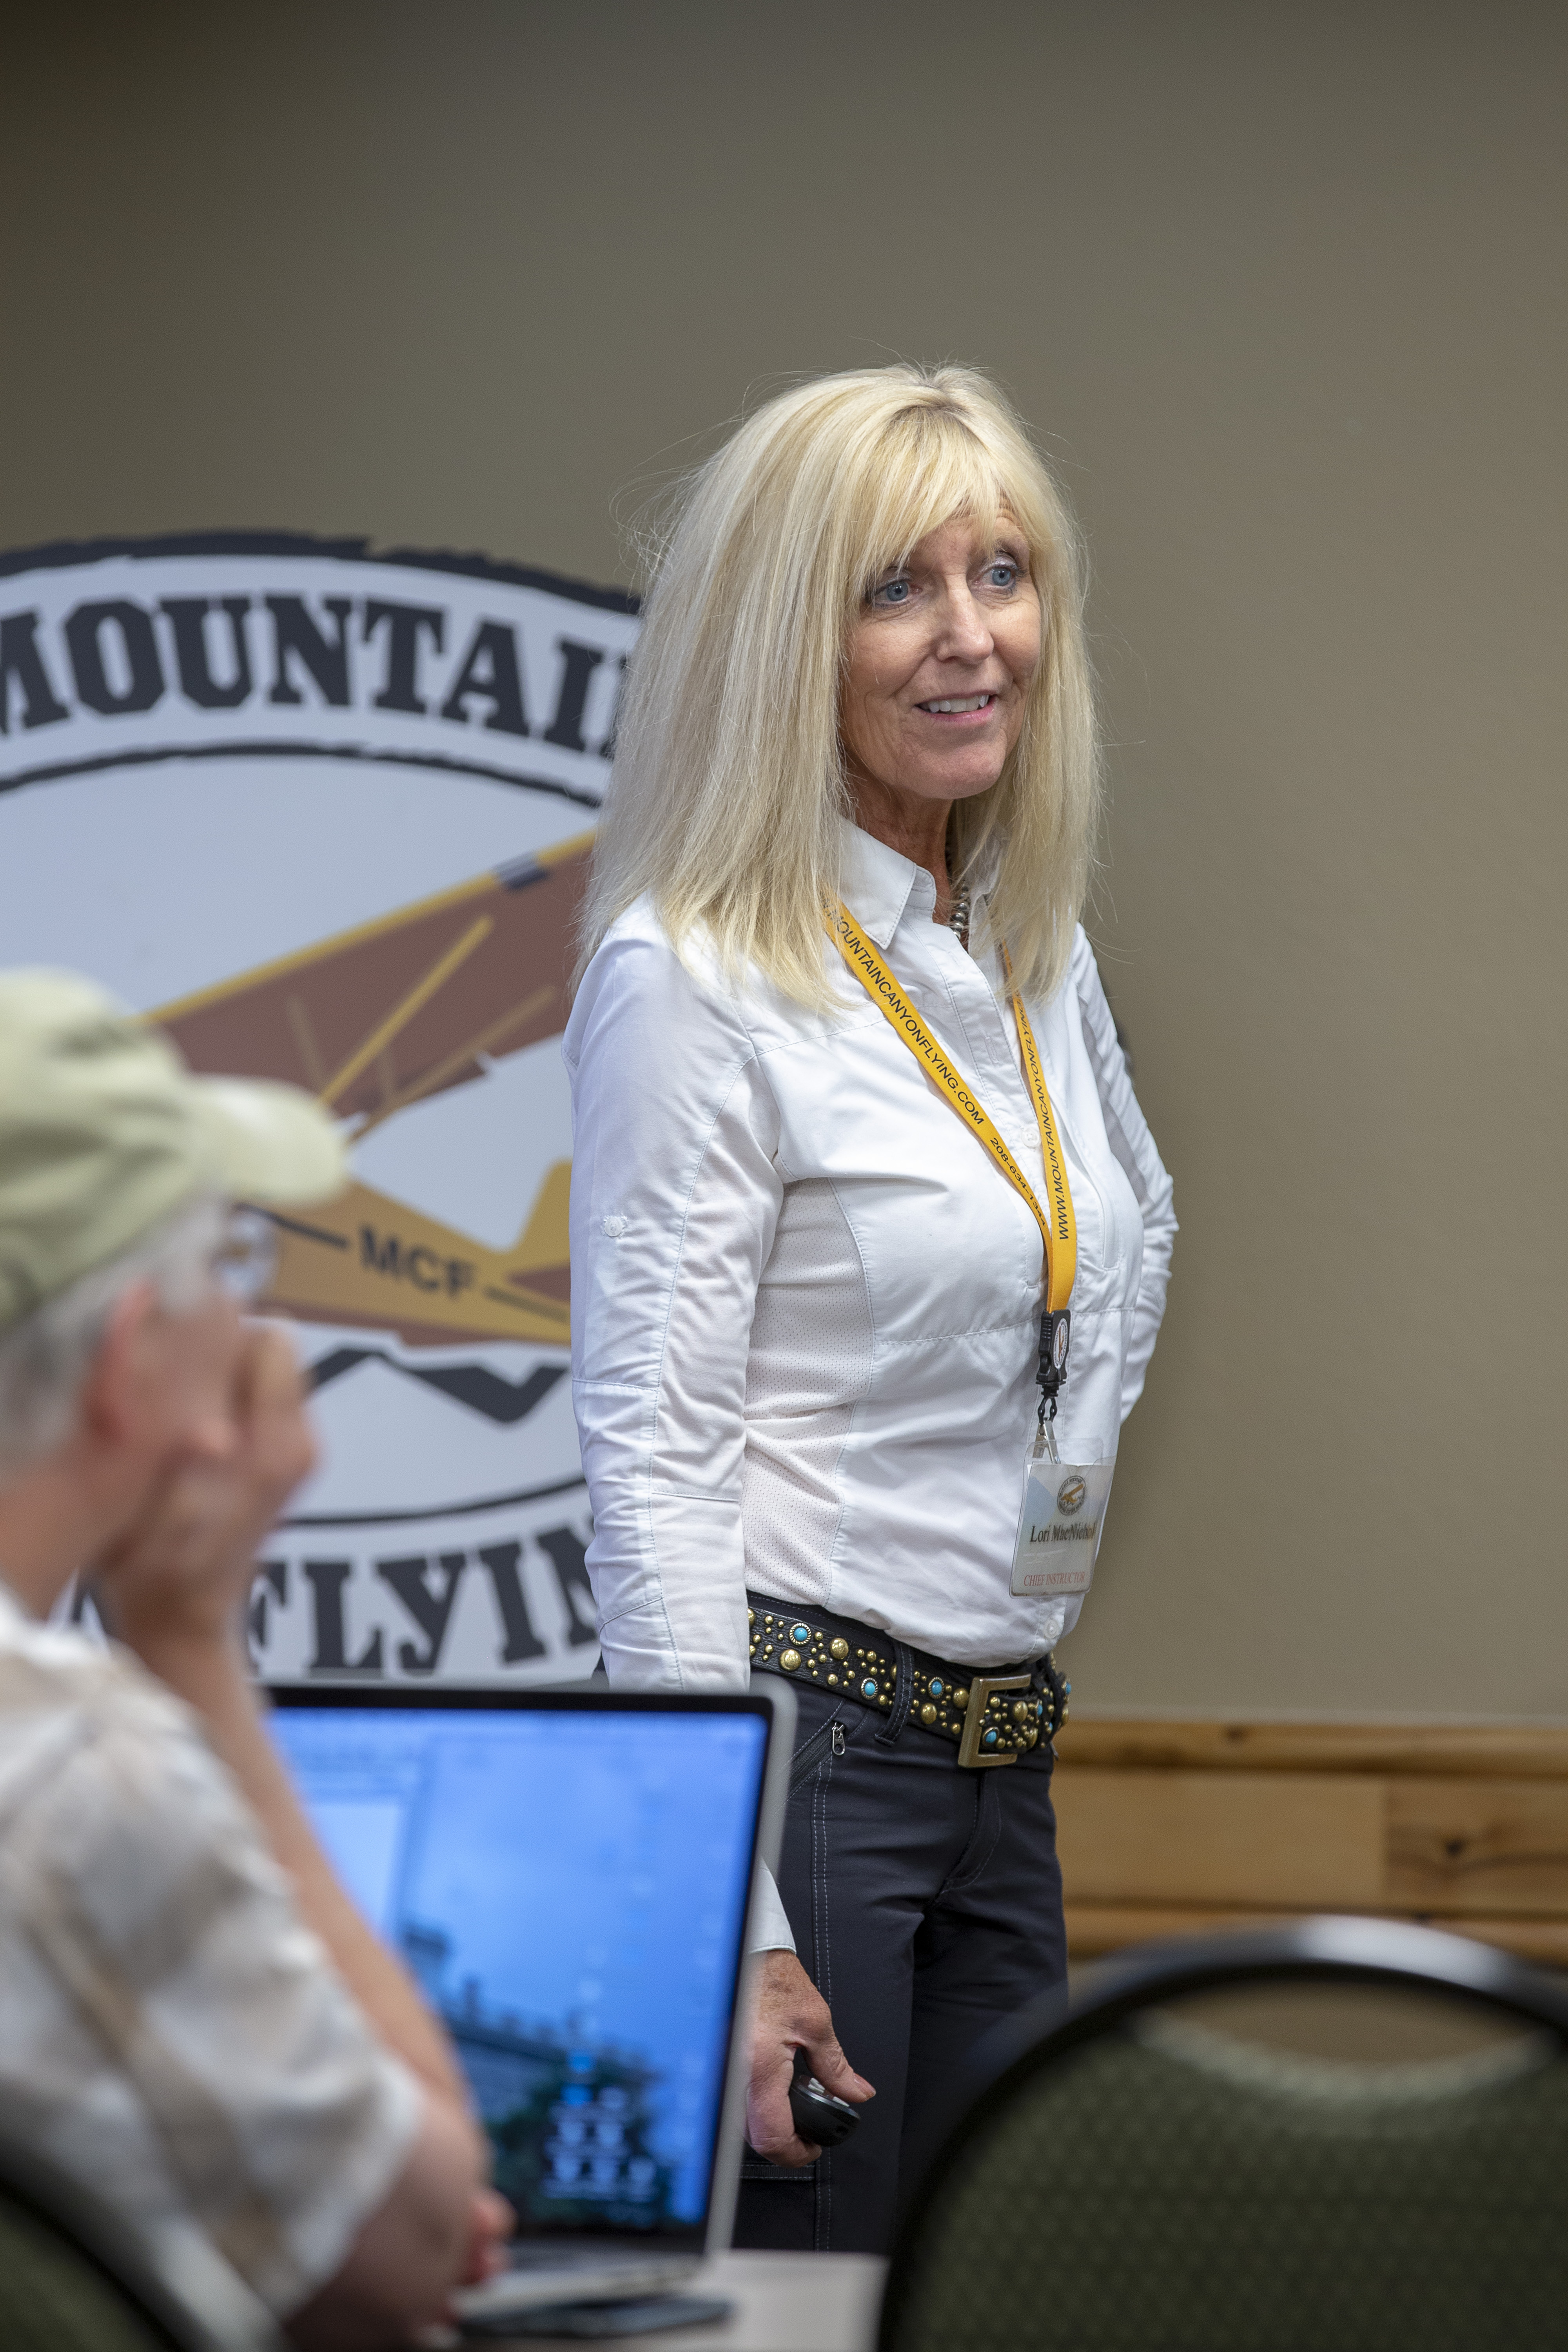 Lori MacNichol, president of McCall Mountain Canyon Flying Seminars, conducts ground school at the McCall Airport in Idaho. Photo by Mike Fizer.